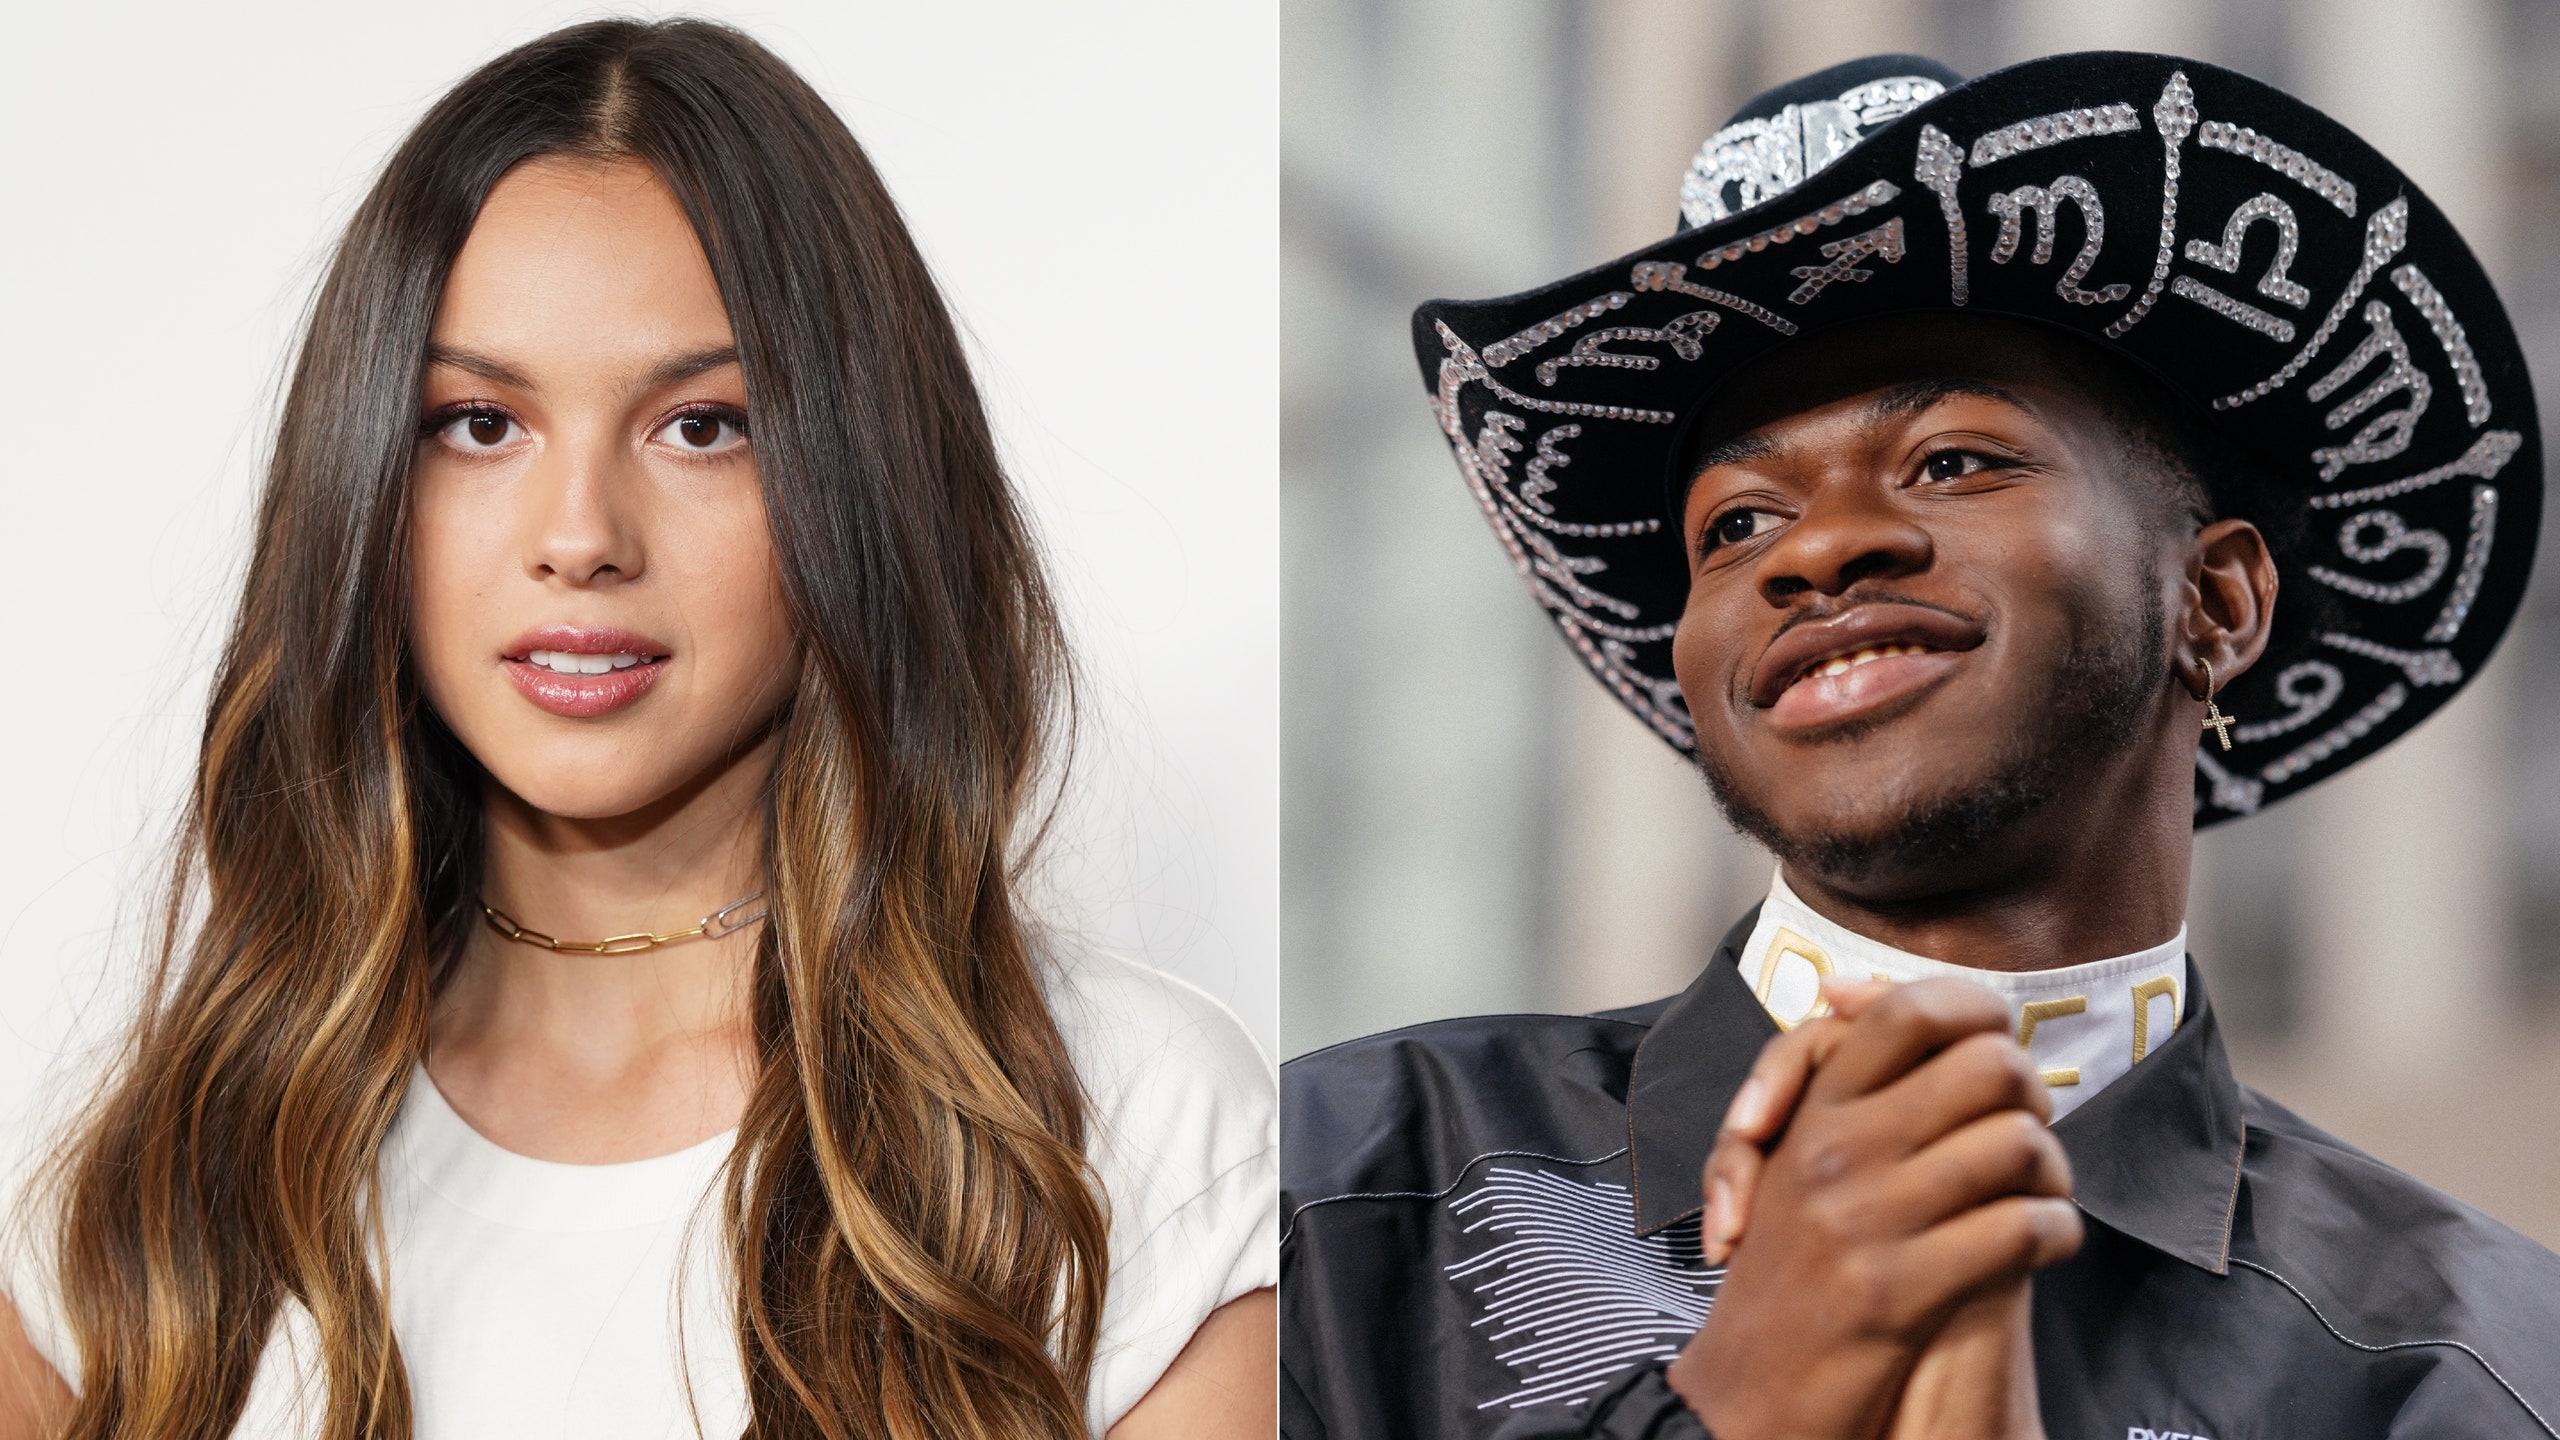 VMAs2021, Olivia and Lil Nas X triumph in a return-Ish to normal